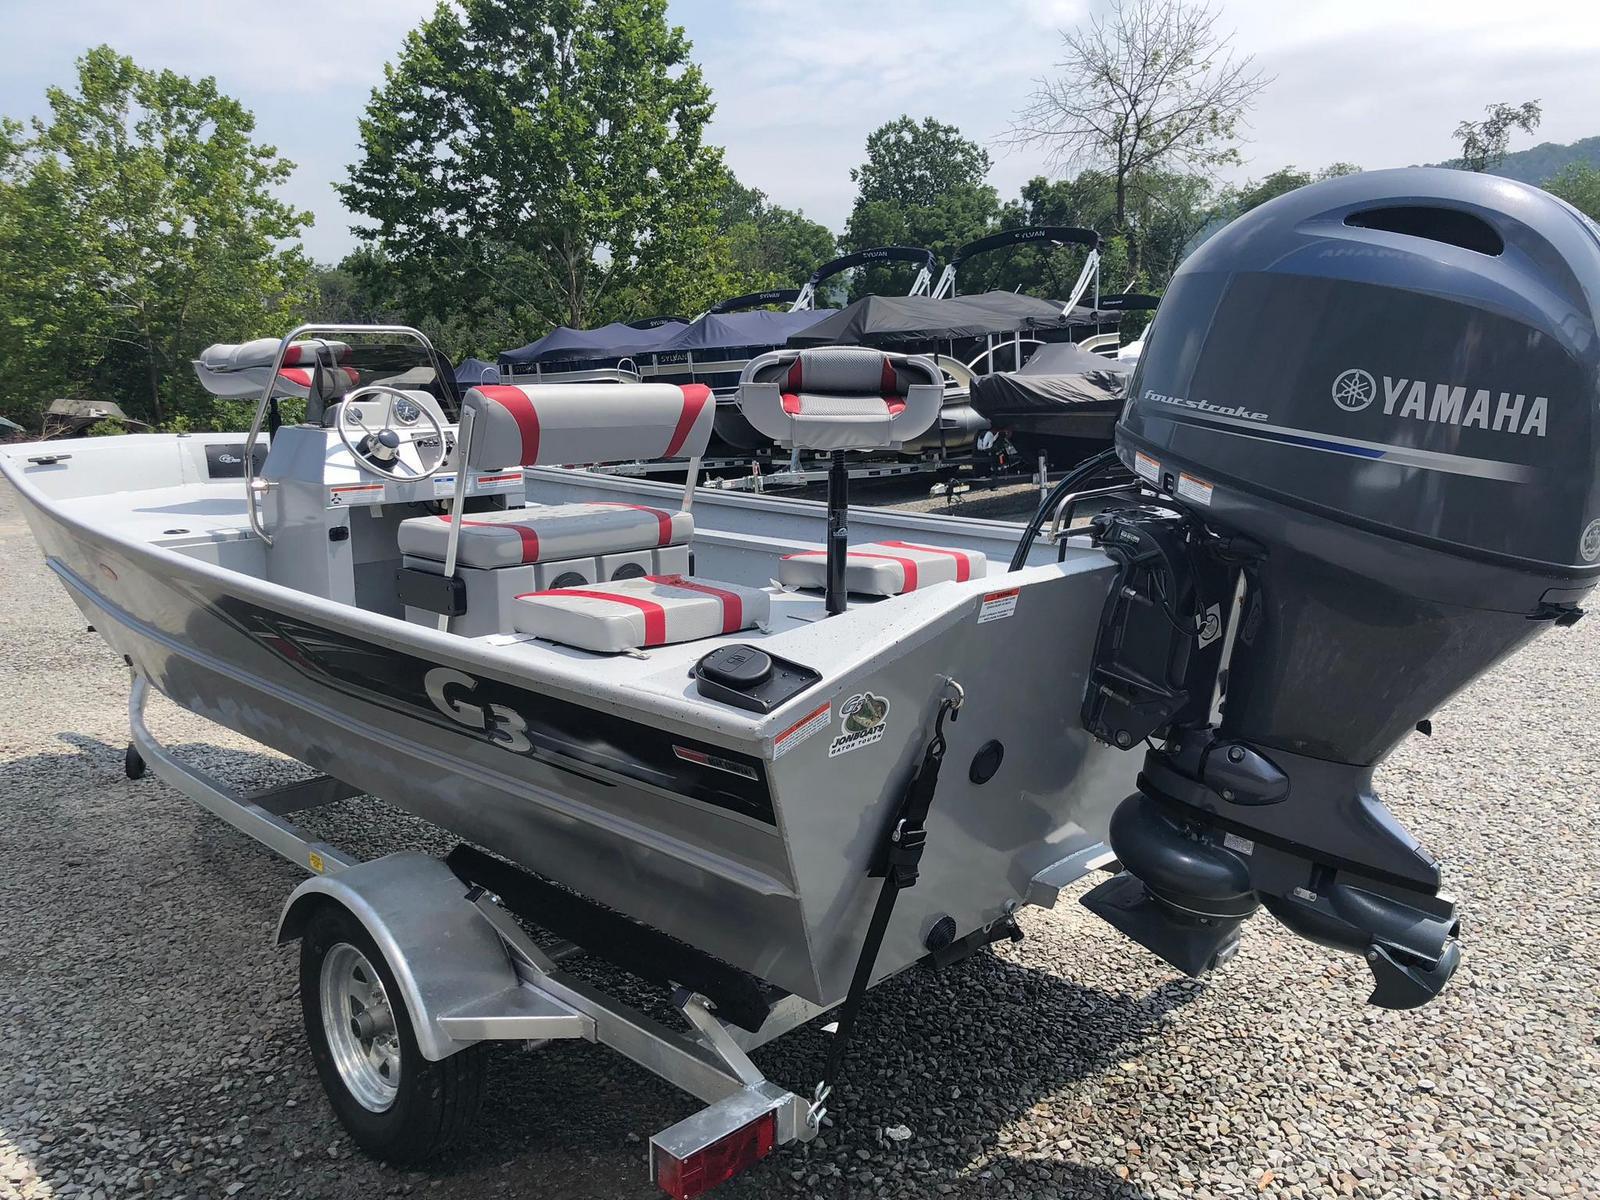 G3 17 Ccj Jet Tunnel boats for sale - boats.com